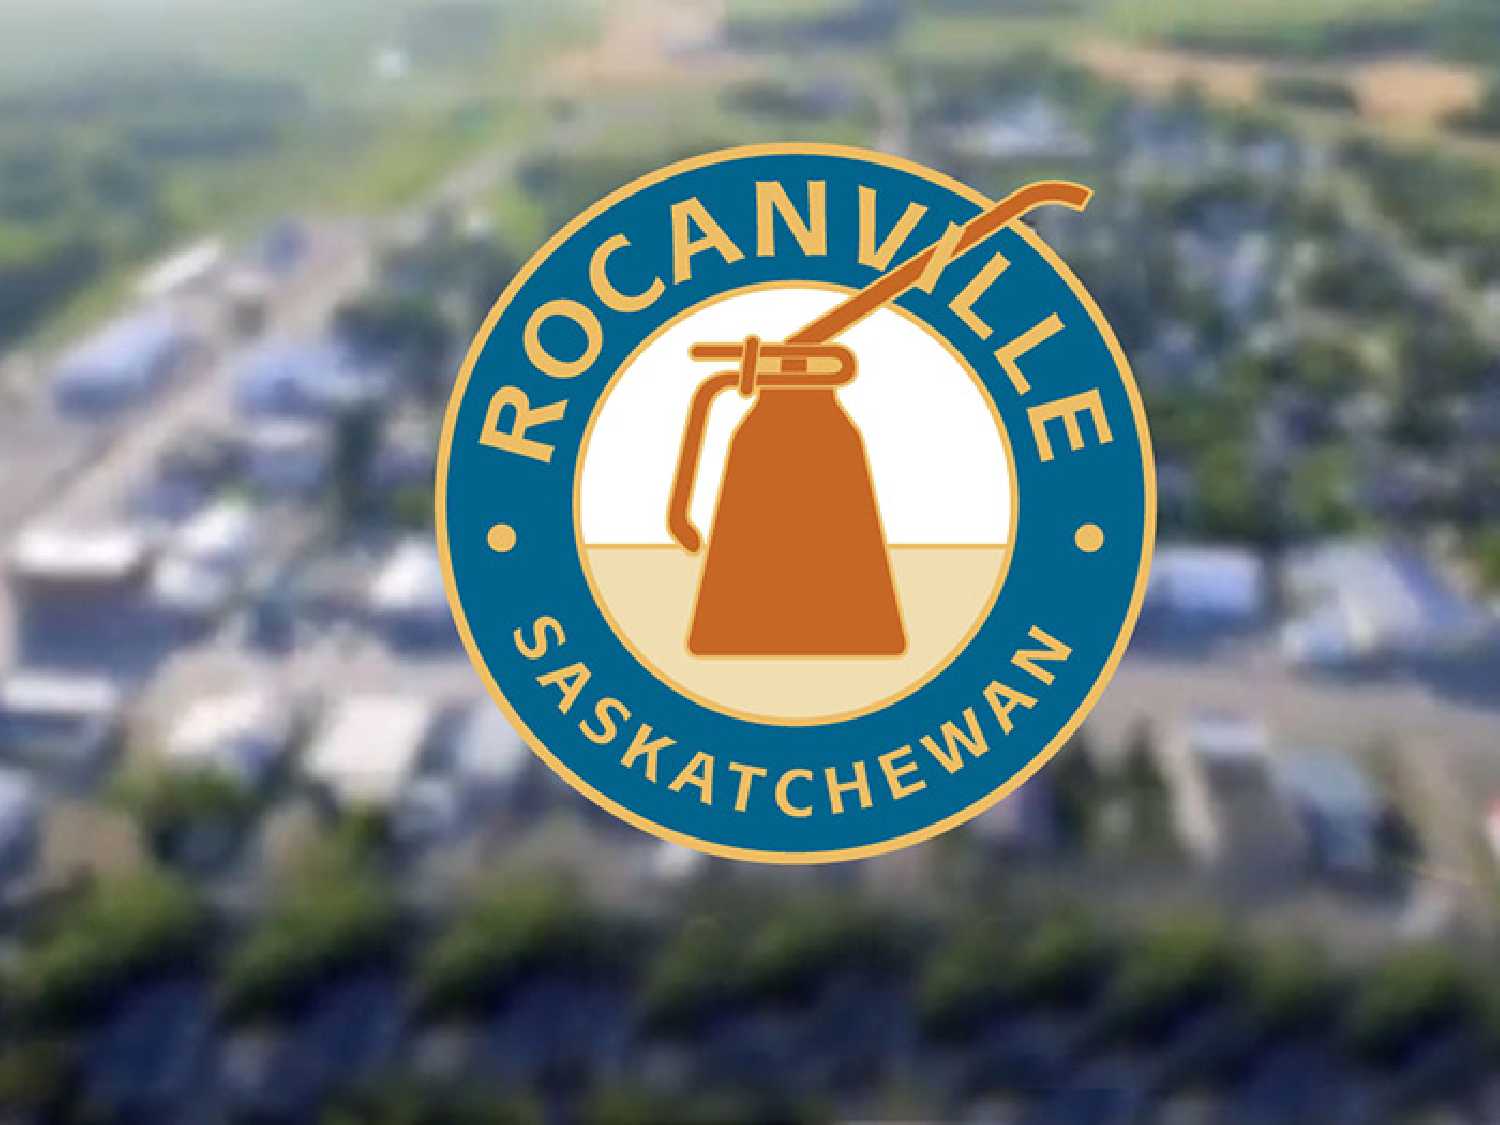 The community meeting originally set to take place last month in Rocanville has now been scheduled for Feb. 26.